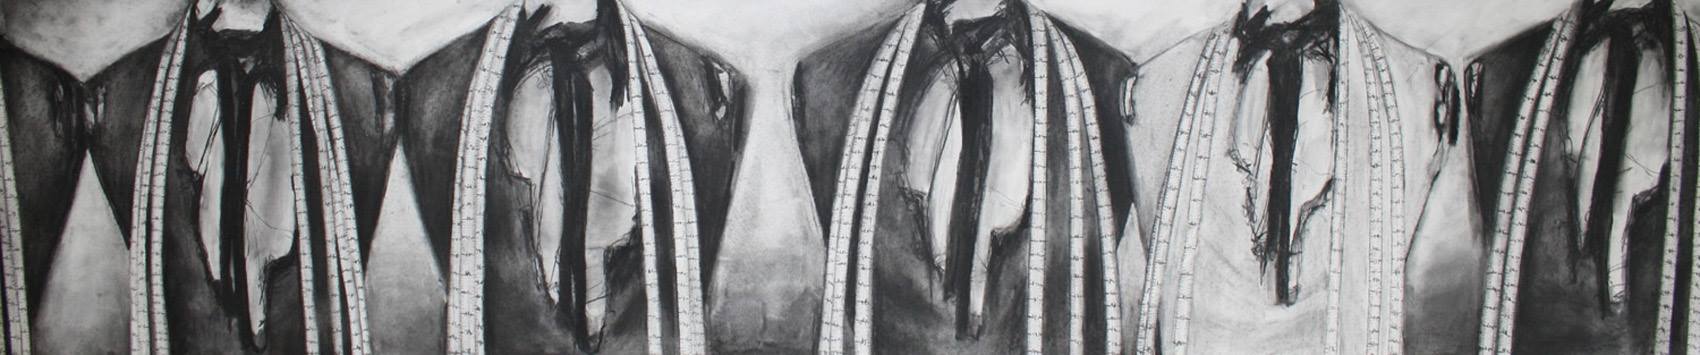 The Line-up, a charcoal drawing by Irish artist Miriam McConnon, Olivier Cornet Gallery Dublin